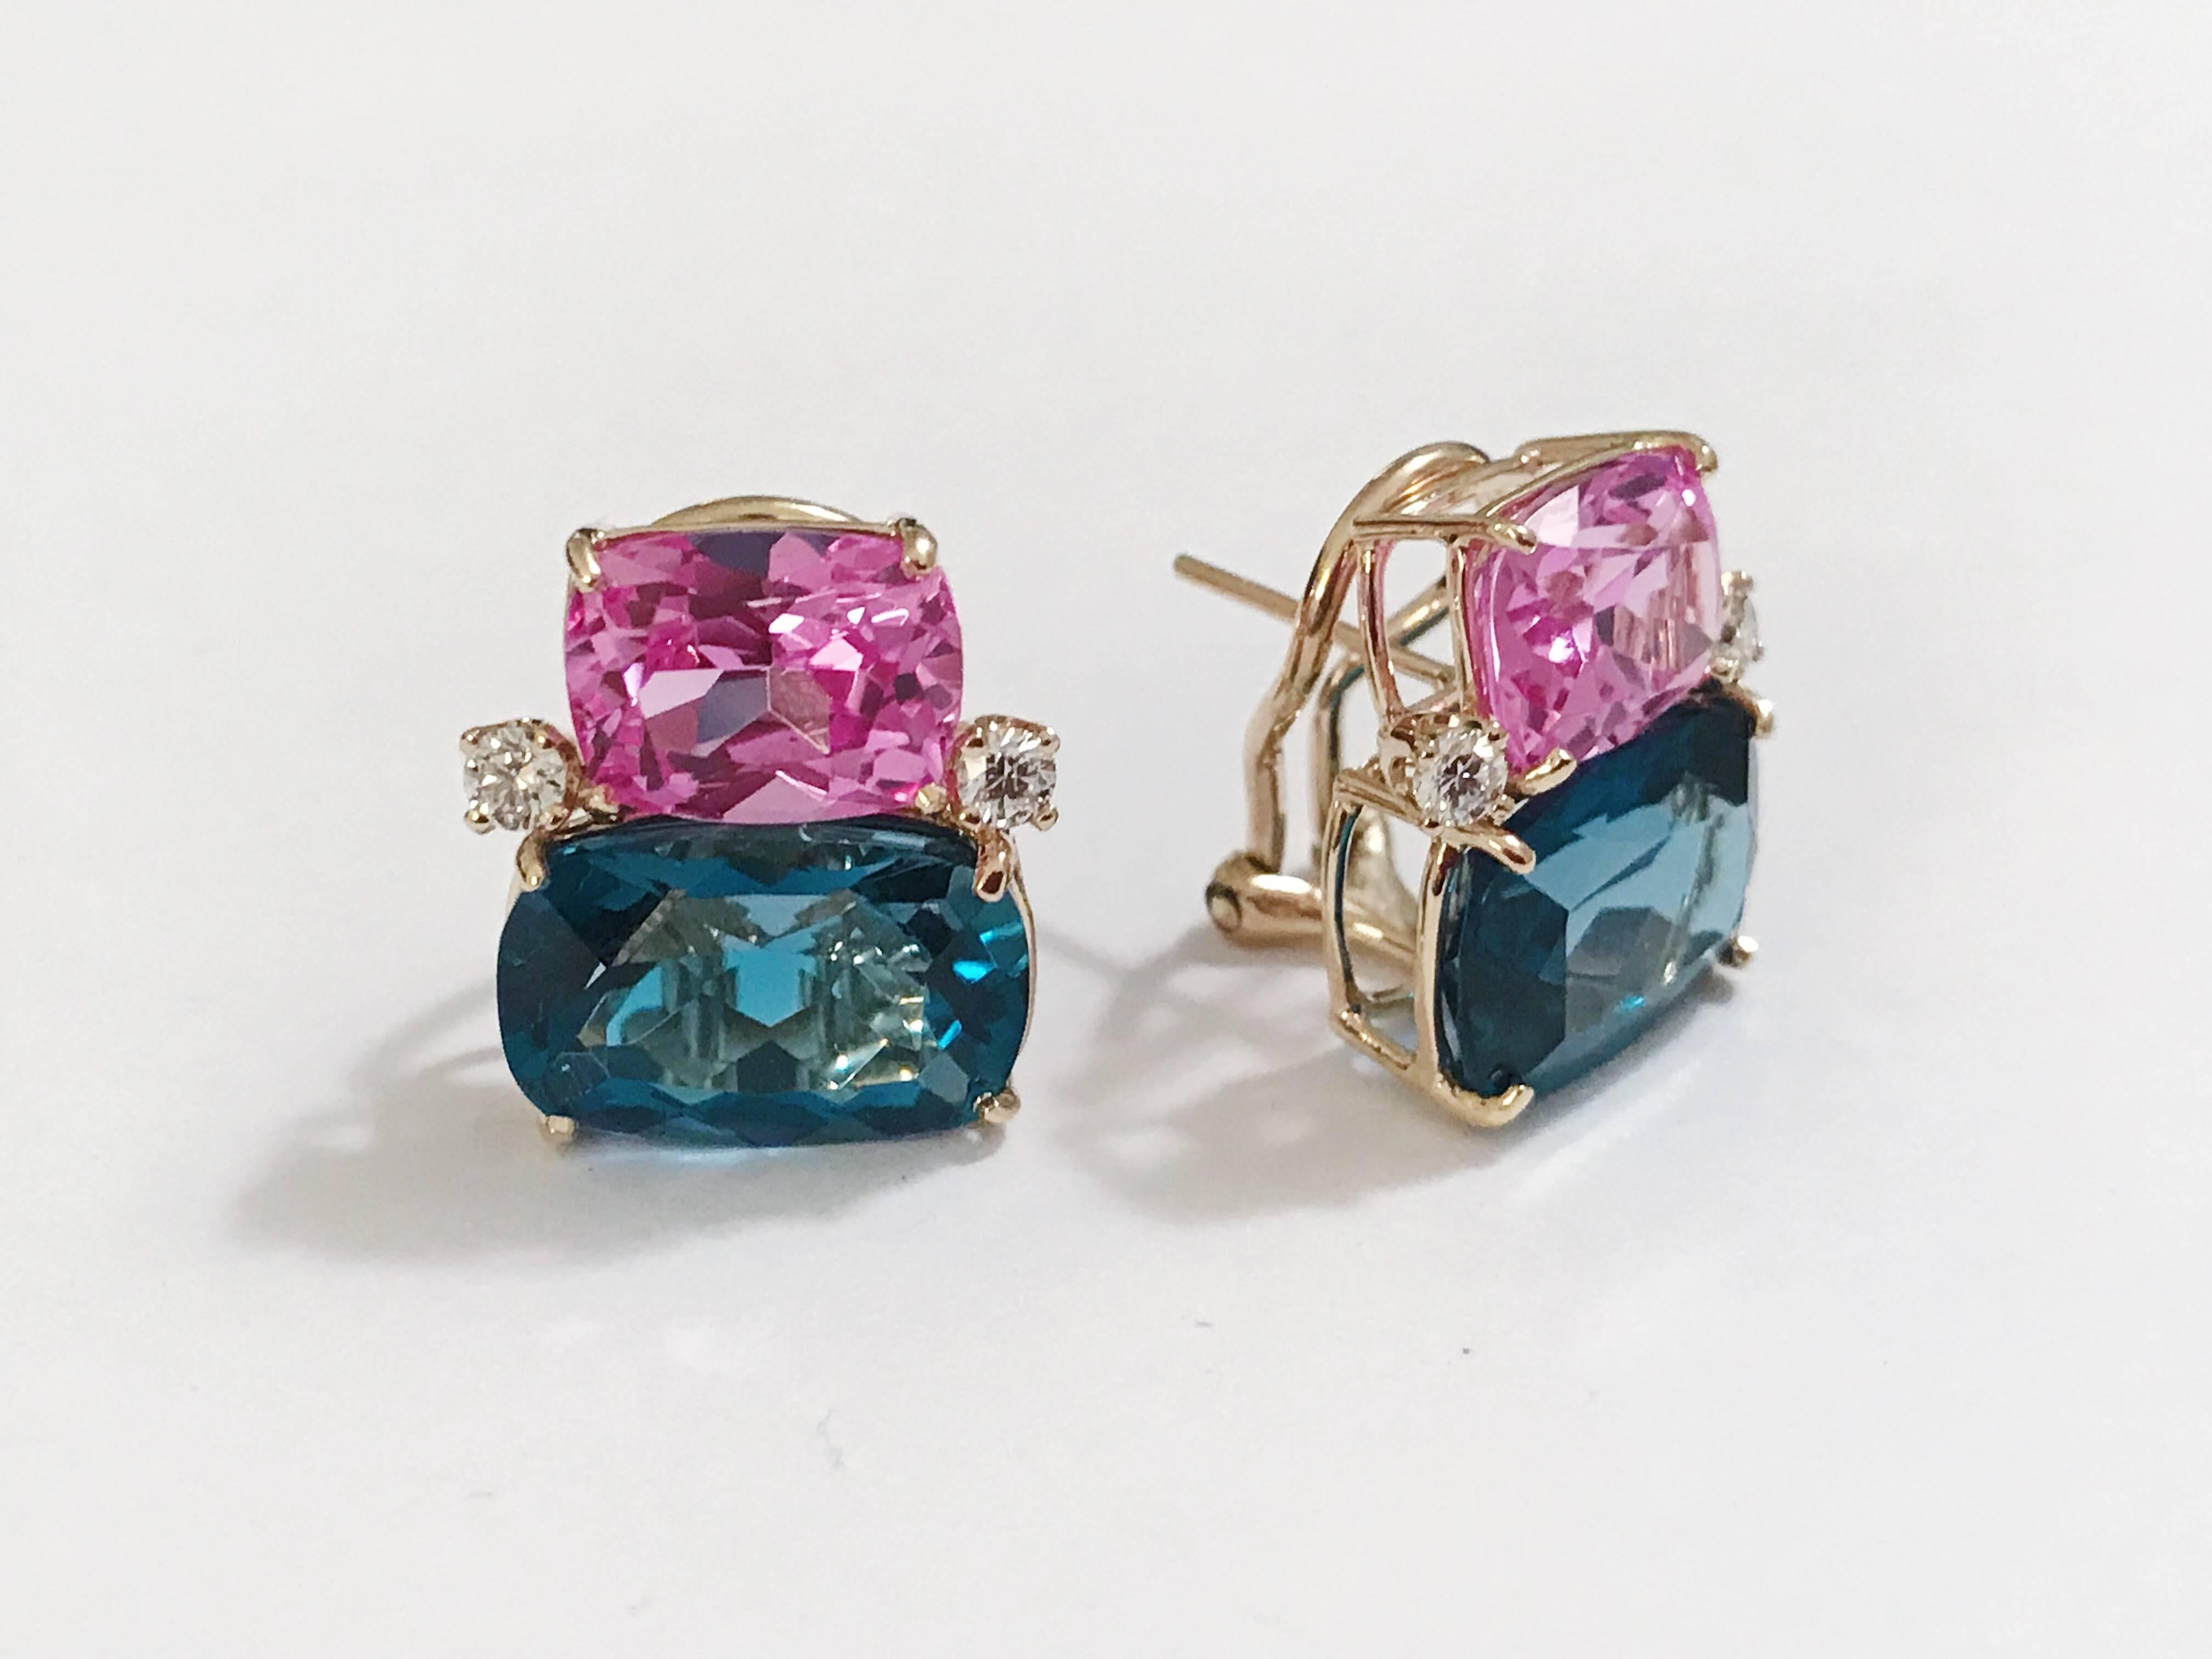 Elegant 18kt Yellow Gold Double CushionHot Pink Topaz and London Blue Topaz Stone Earrings with Diamonds. 

This is a classic day to evening earring that can be made with a clip or pierced. The meaning measures 3/4' tall and 1/2